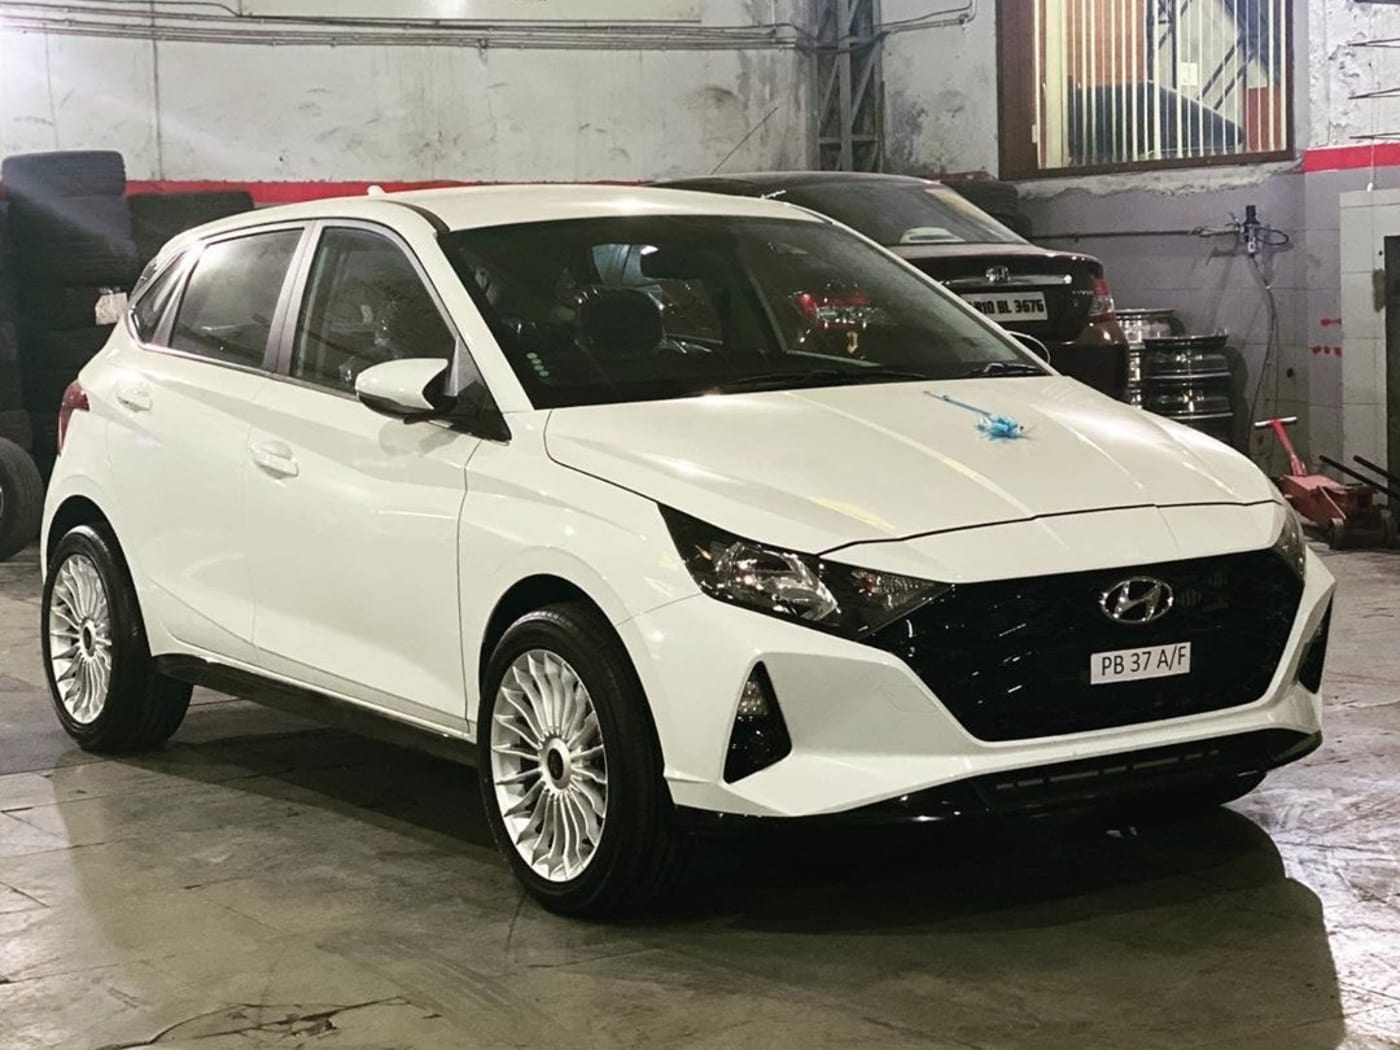 India's First Modified New-Gen Hyundai i20 Gets 17-Inch Aftermarket Alloys